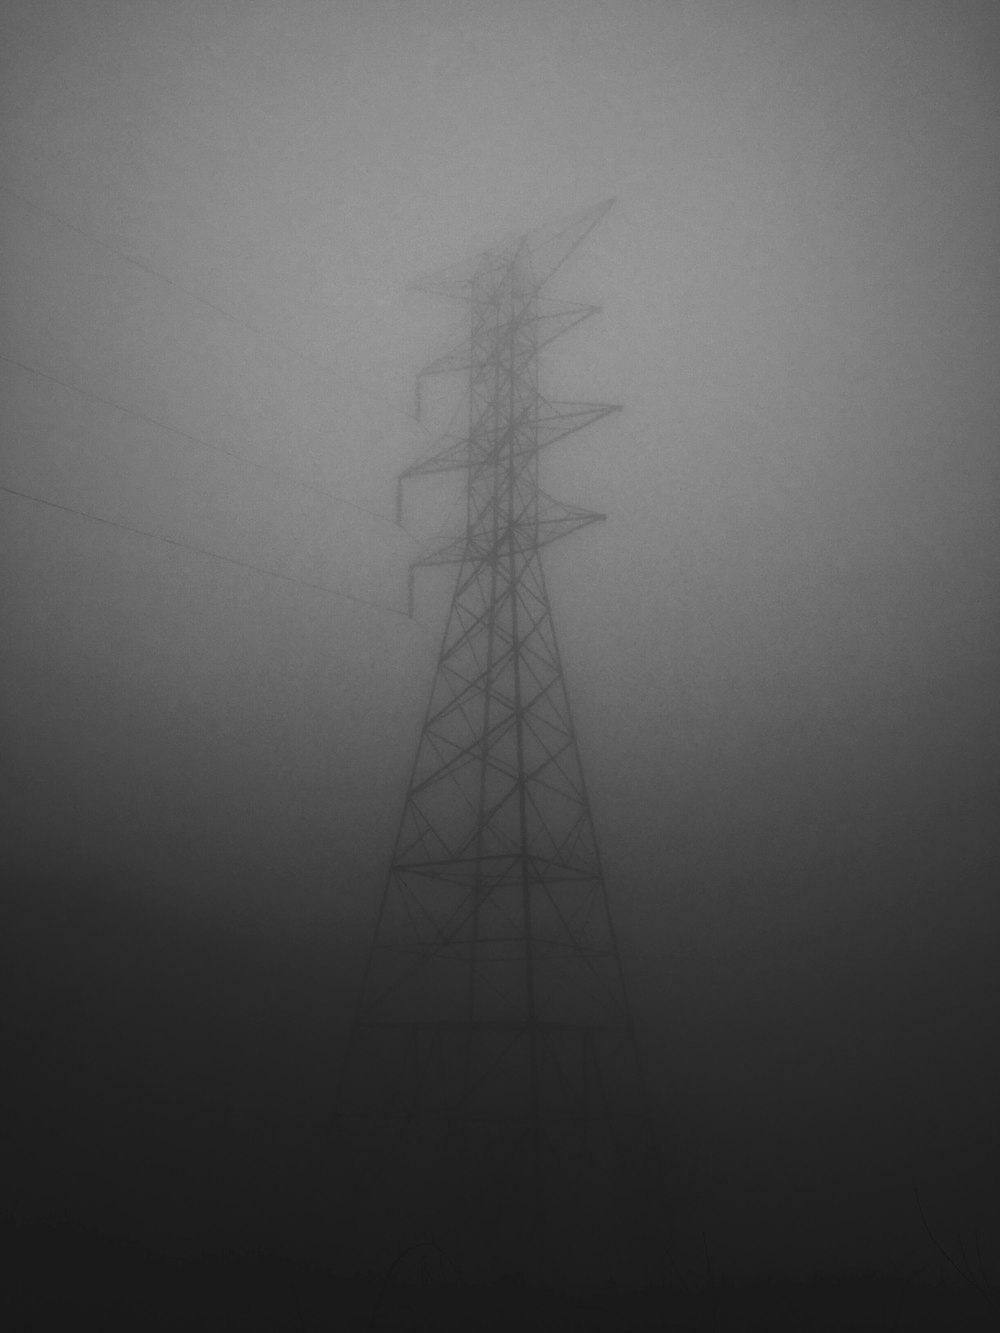 electric pylon covered by gray clouds